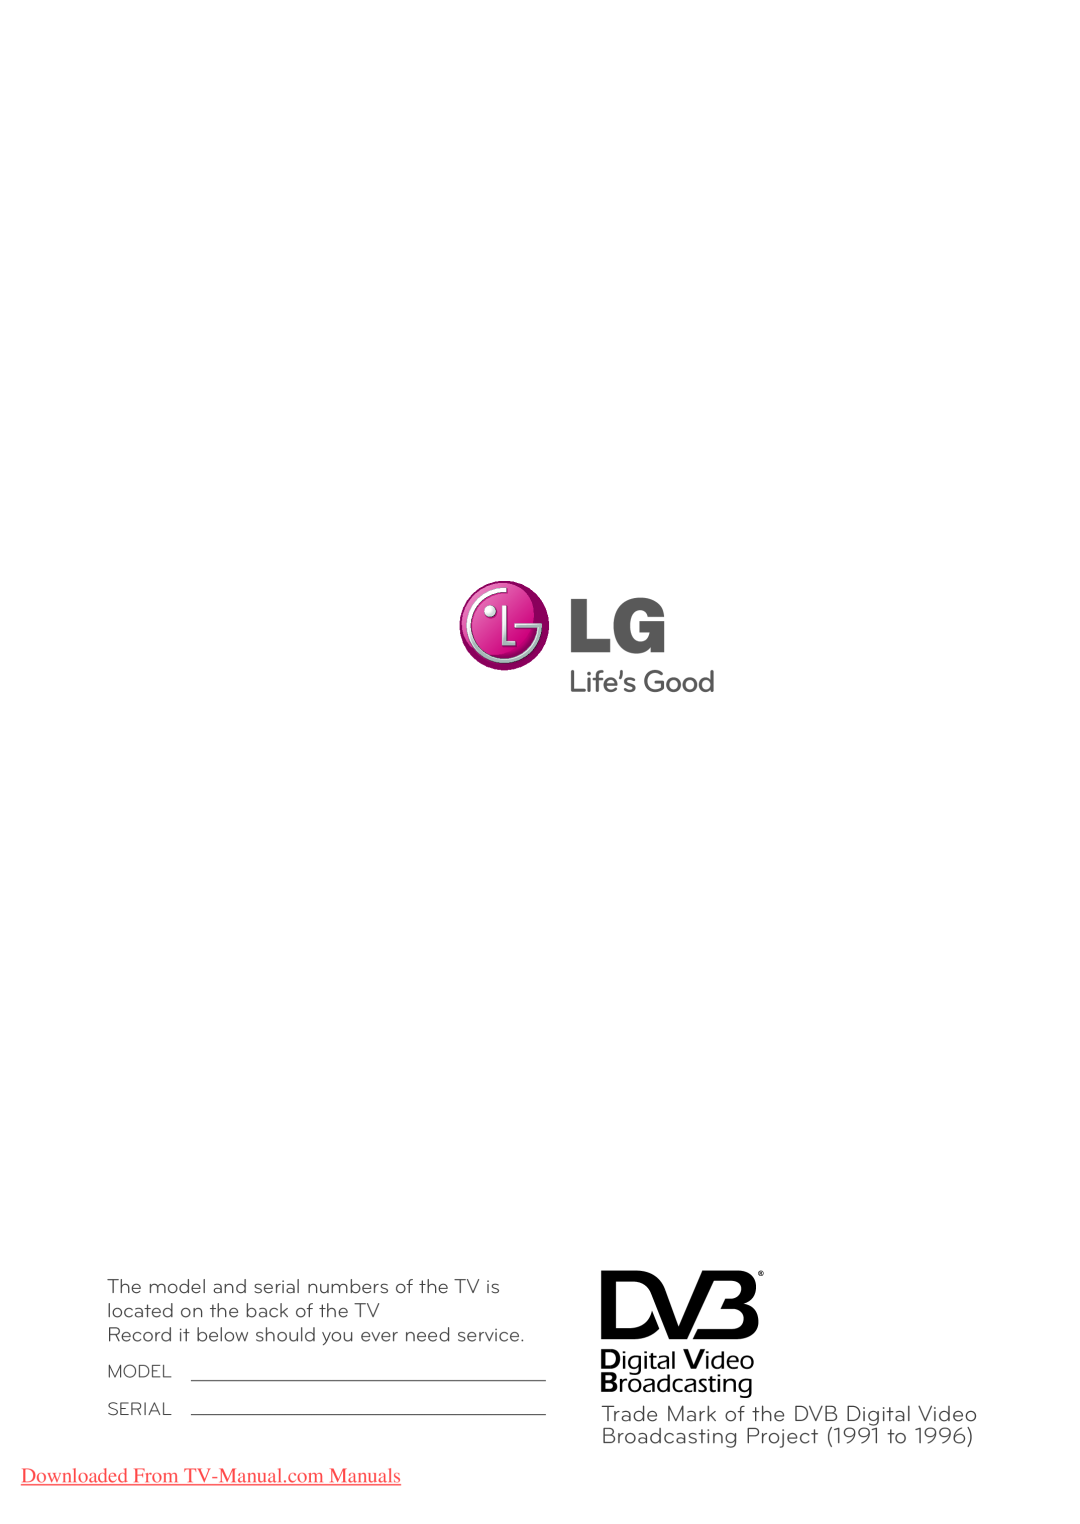 LG Electronics 42/50PT45**, 50/60PZ55** Trade Mark of the DVB Digital Video Broadcasting Project 1991 to, Model Serial 